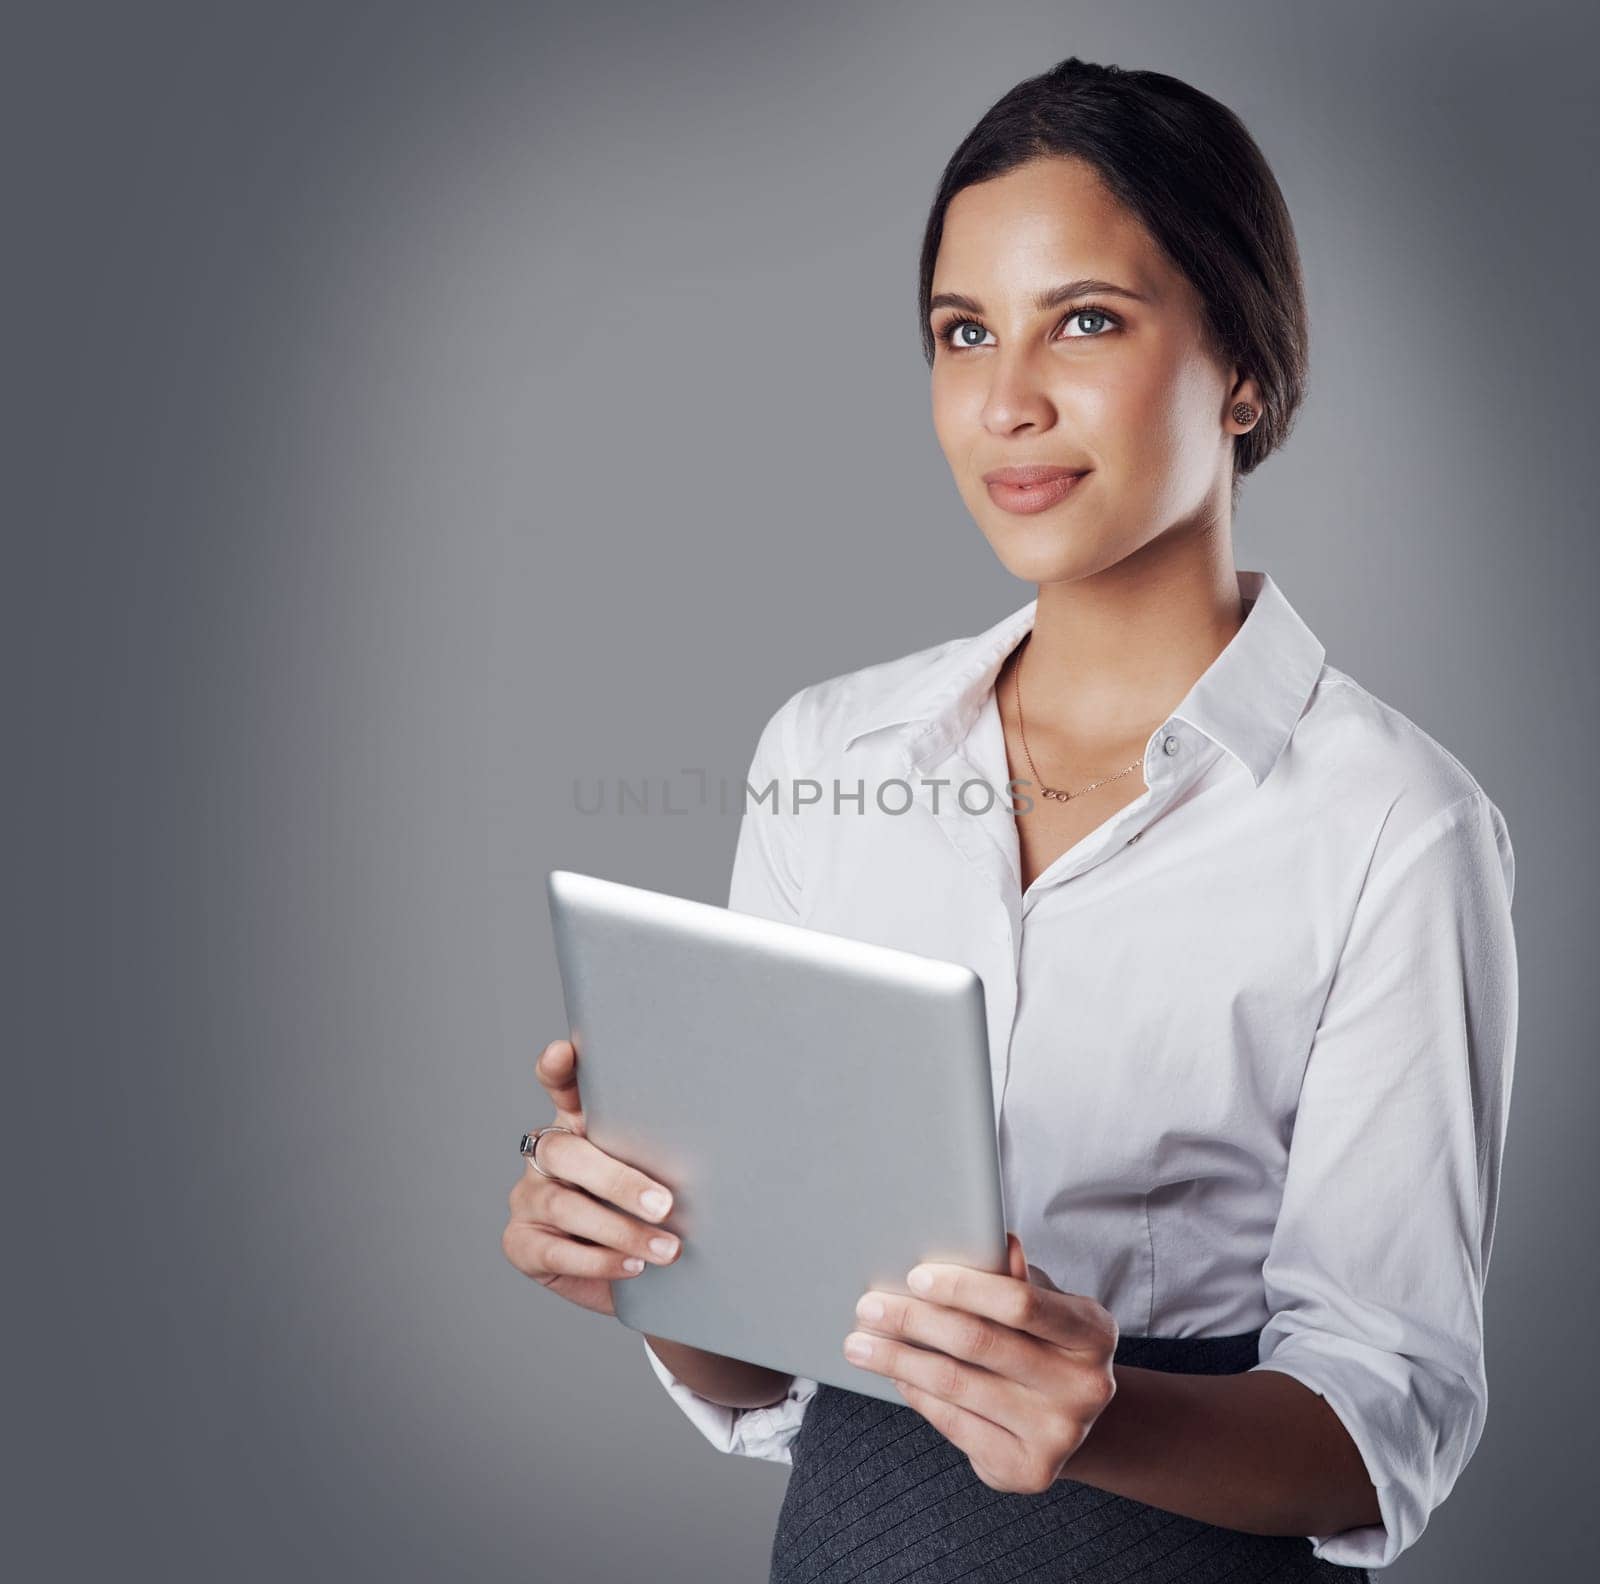 Staying organized and connected with cutting edge technology. Studio shot of a young businesswoman using a digital tablet against a gray background